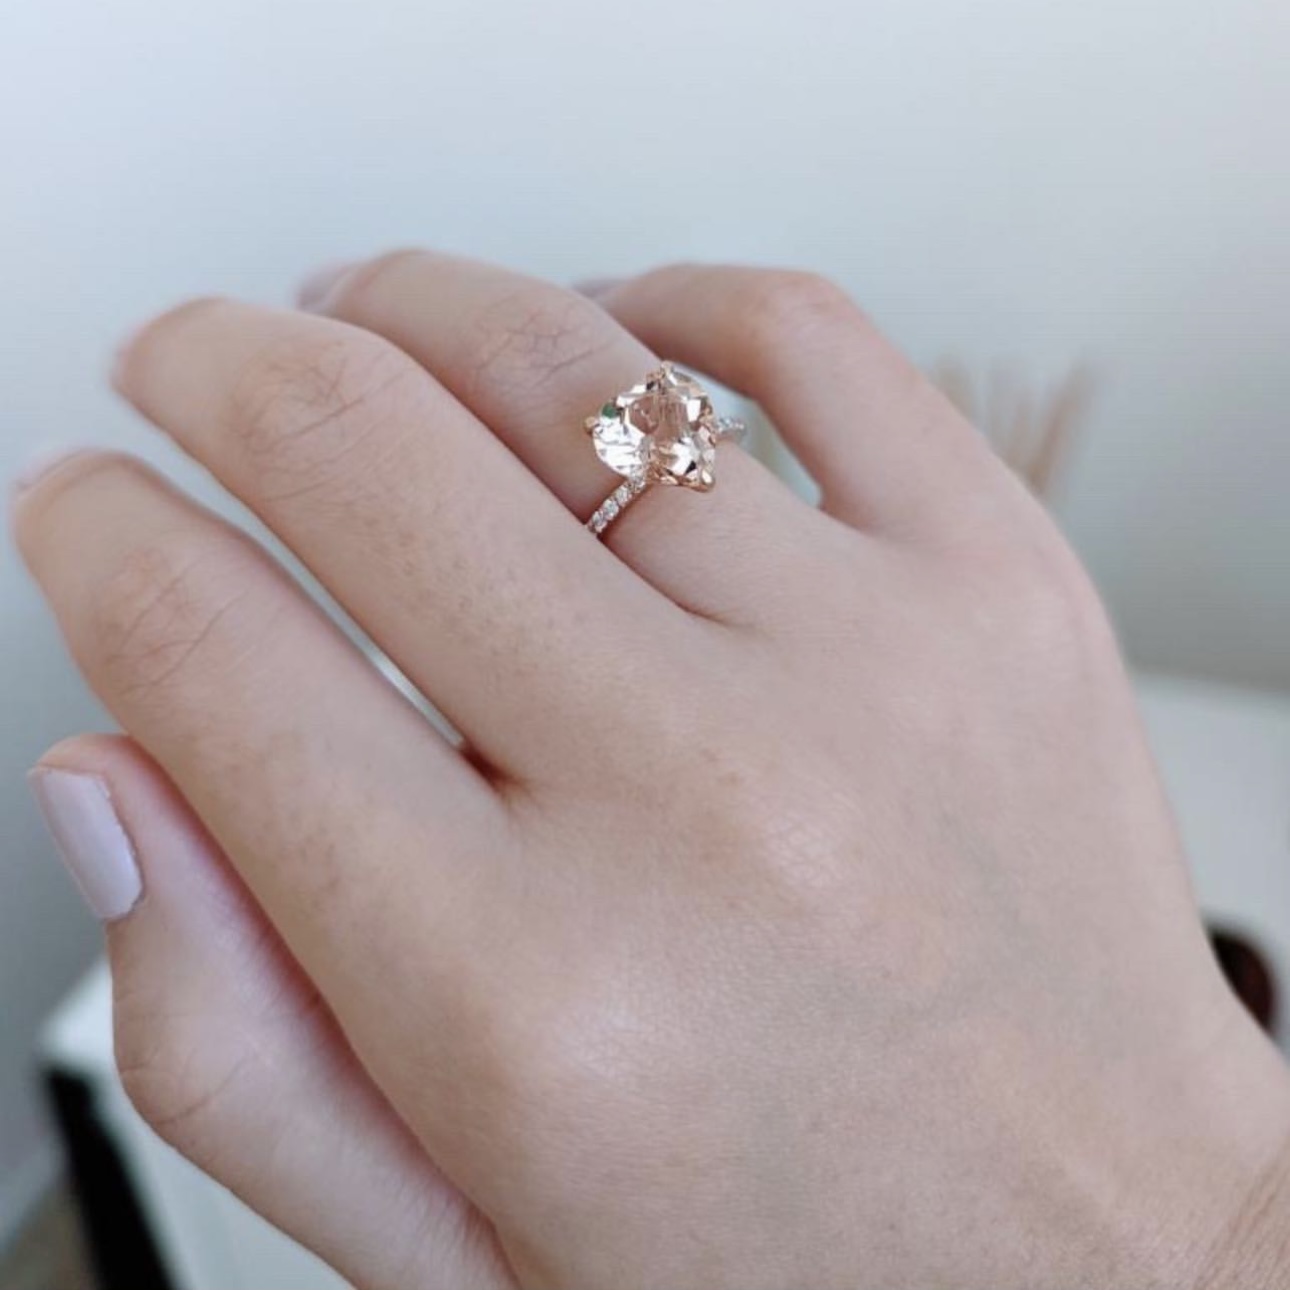 Heart Evangelista Gifts Kane Lim A Diamond Necklace From Cartier